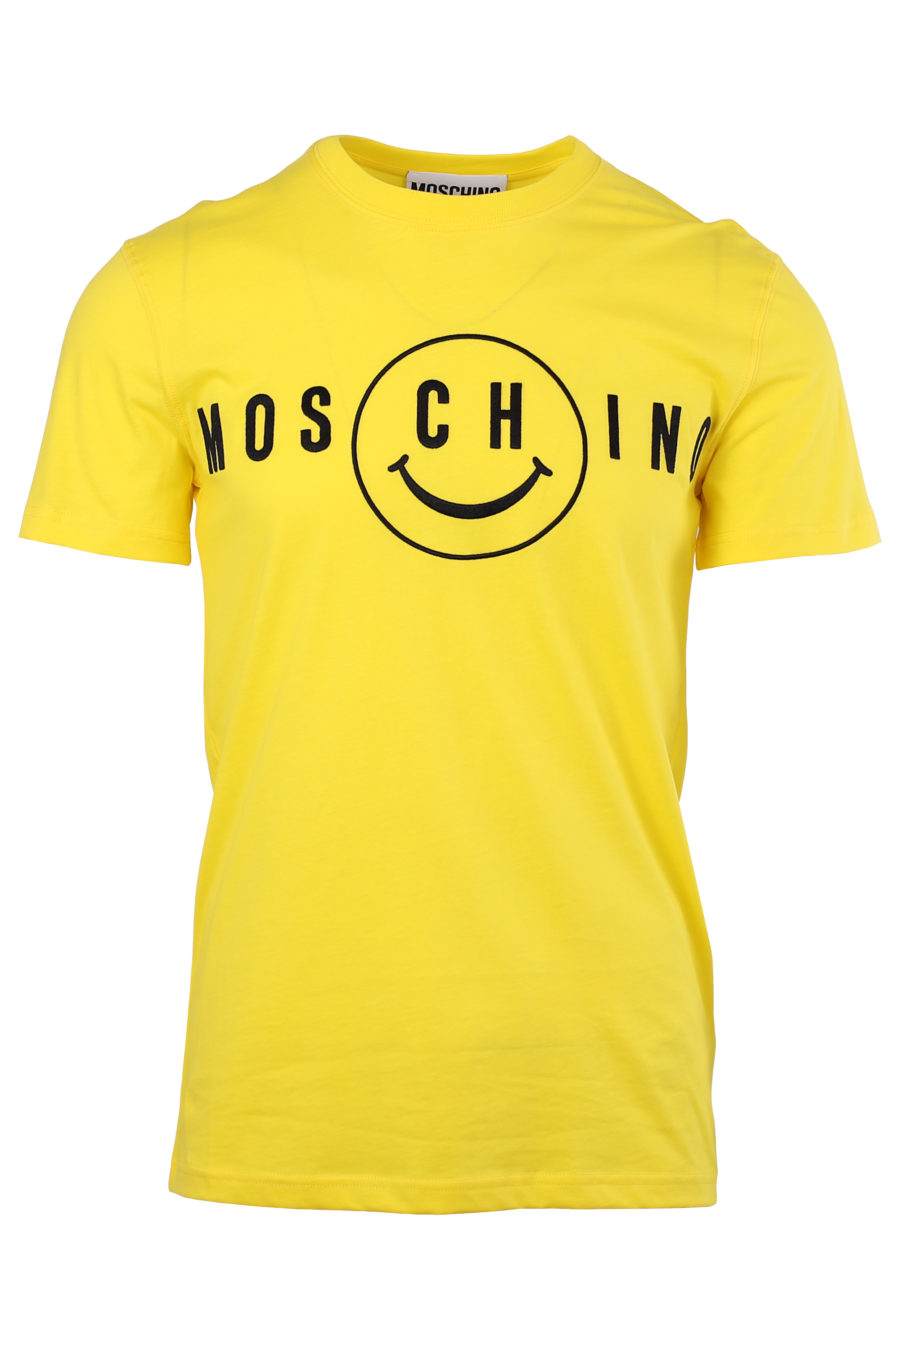 Yellow "Smiley" T-shirt with embroidered logo - IMG 9974